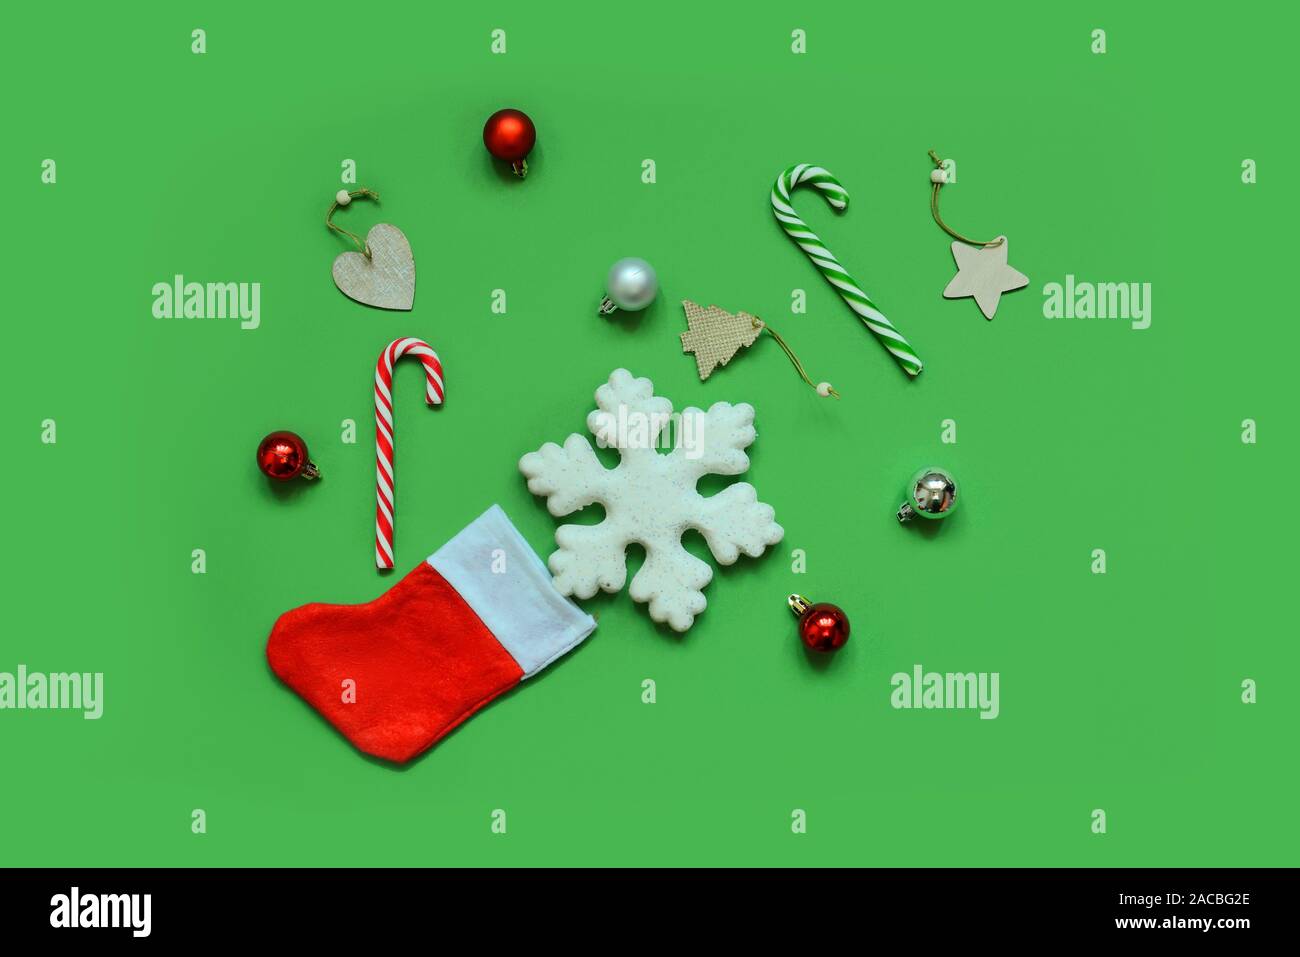 Christmas composition. Frame made of christmas gifts, pine branches, toys on green background. Flat lay, top view, copy space. Stock Photo